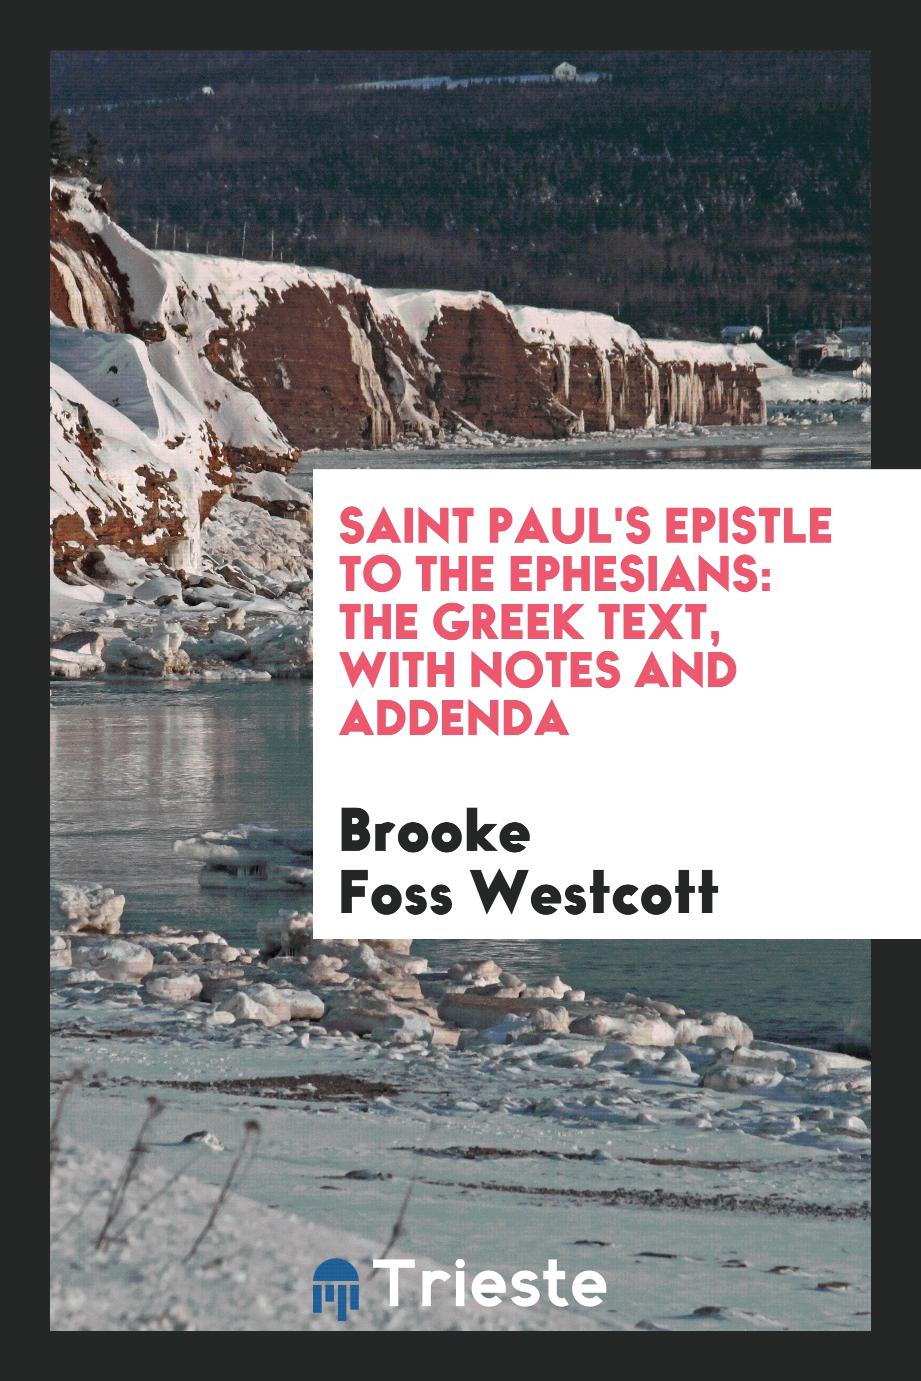 Saint Paul's Epistle to the Ephesians: the Greek text, with notes and addenda